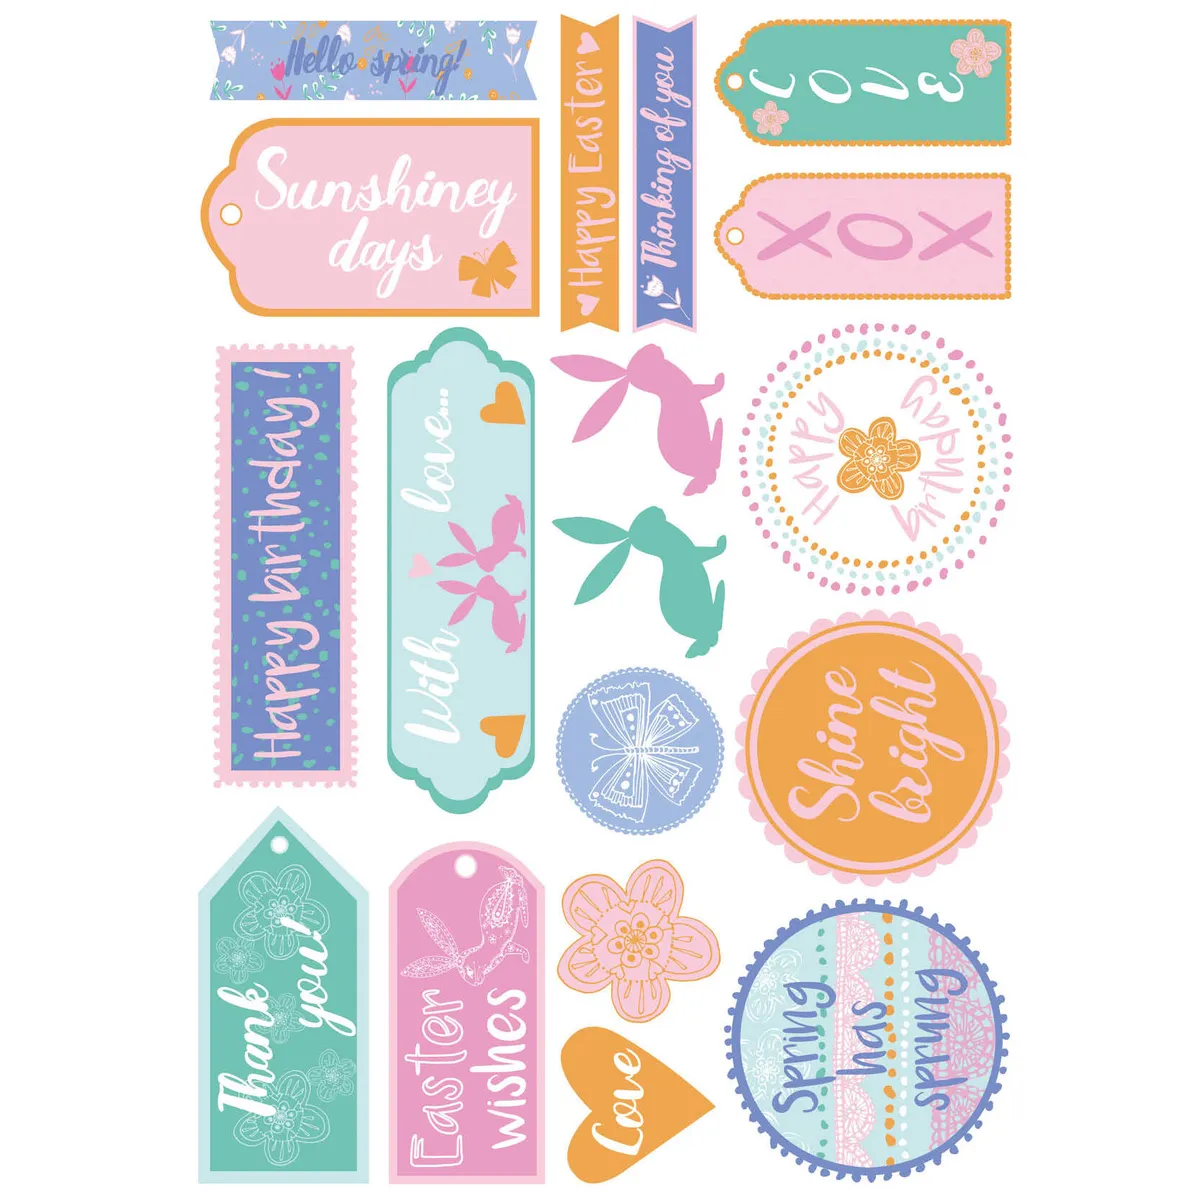 Free sketchy Happy Easter patterned papers_08